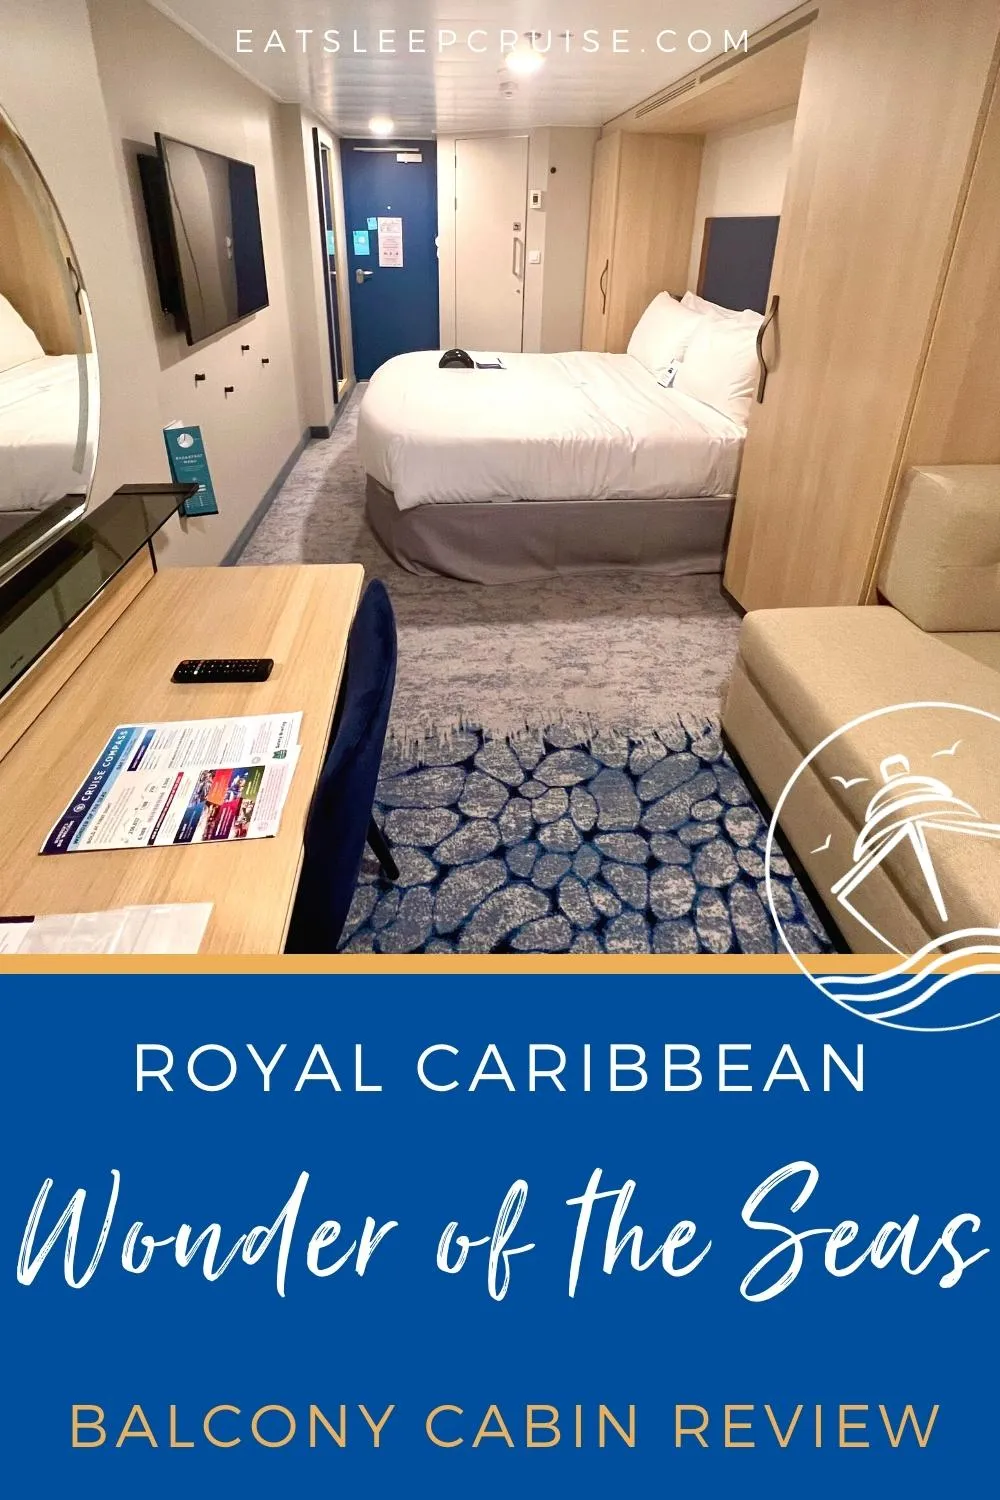 Wonder of the Seas Ocean View Balcony Cabin Review